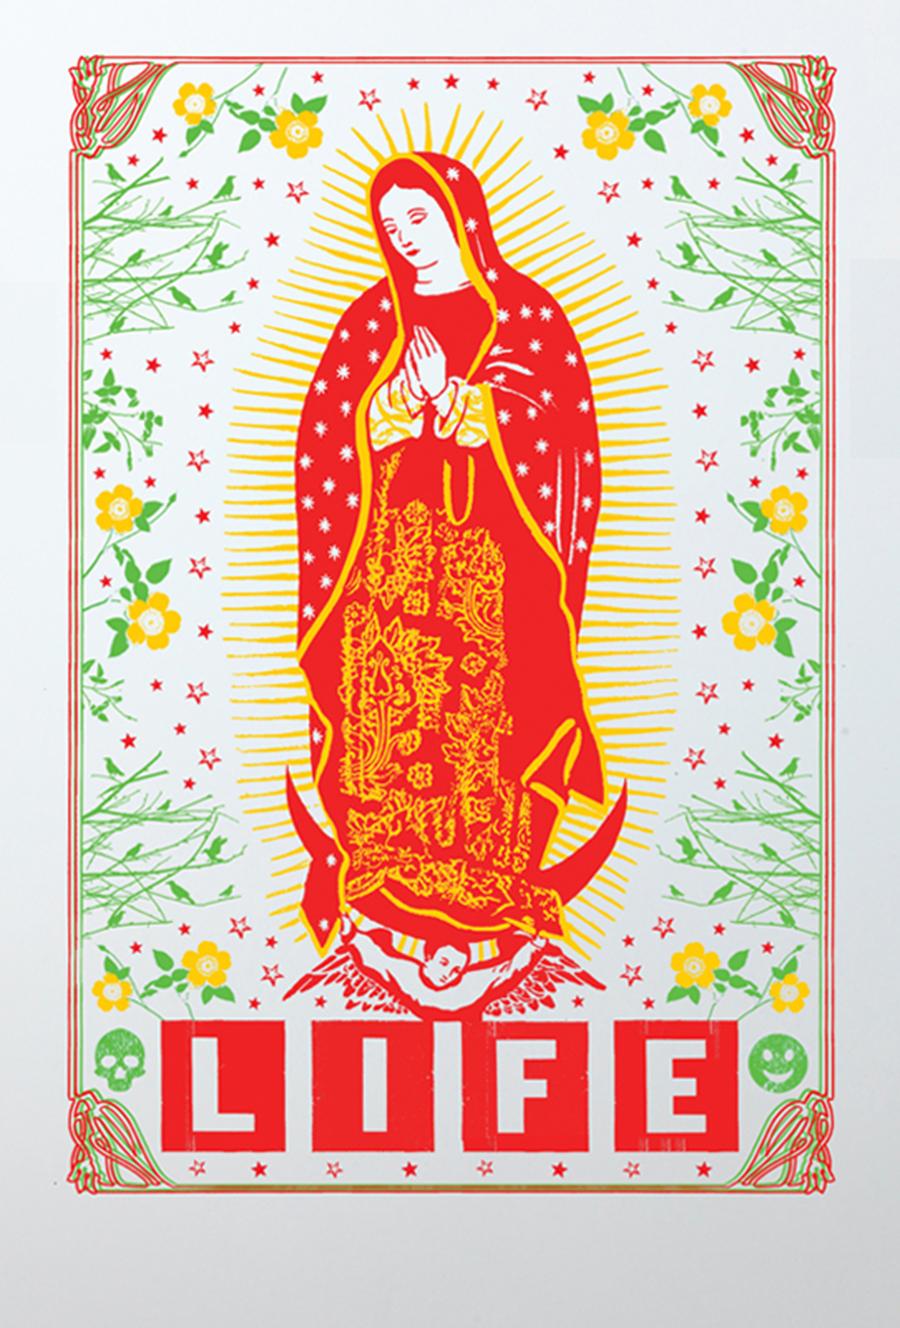 GUADALUPE - Print by Claudio Roncoli